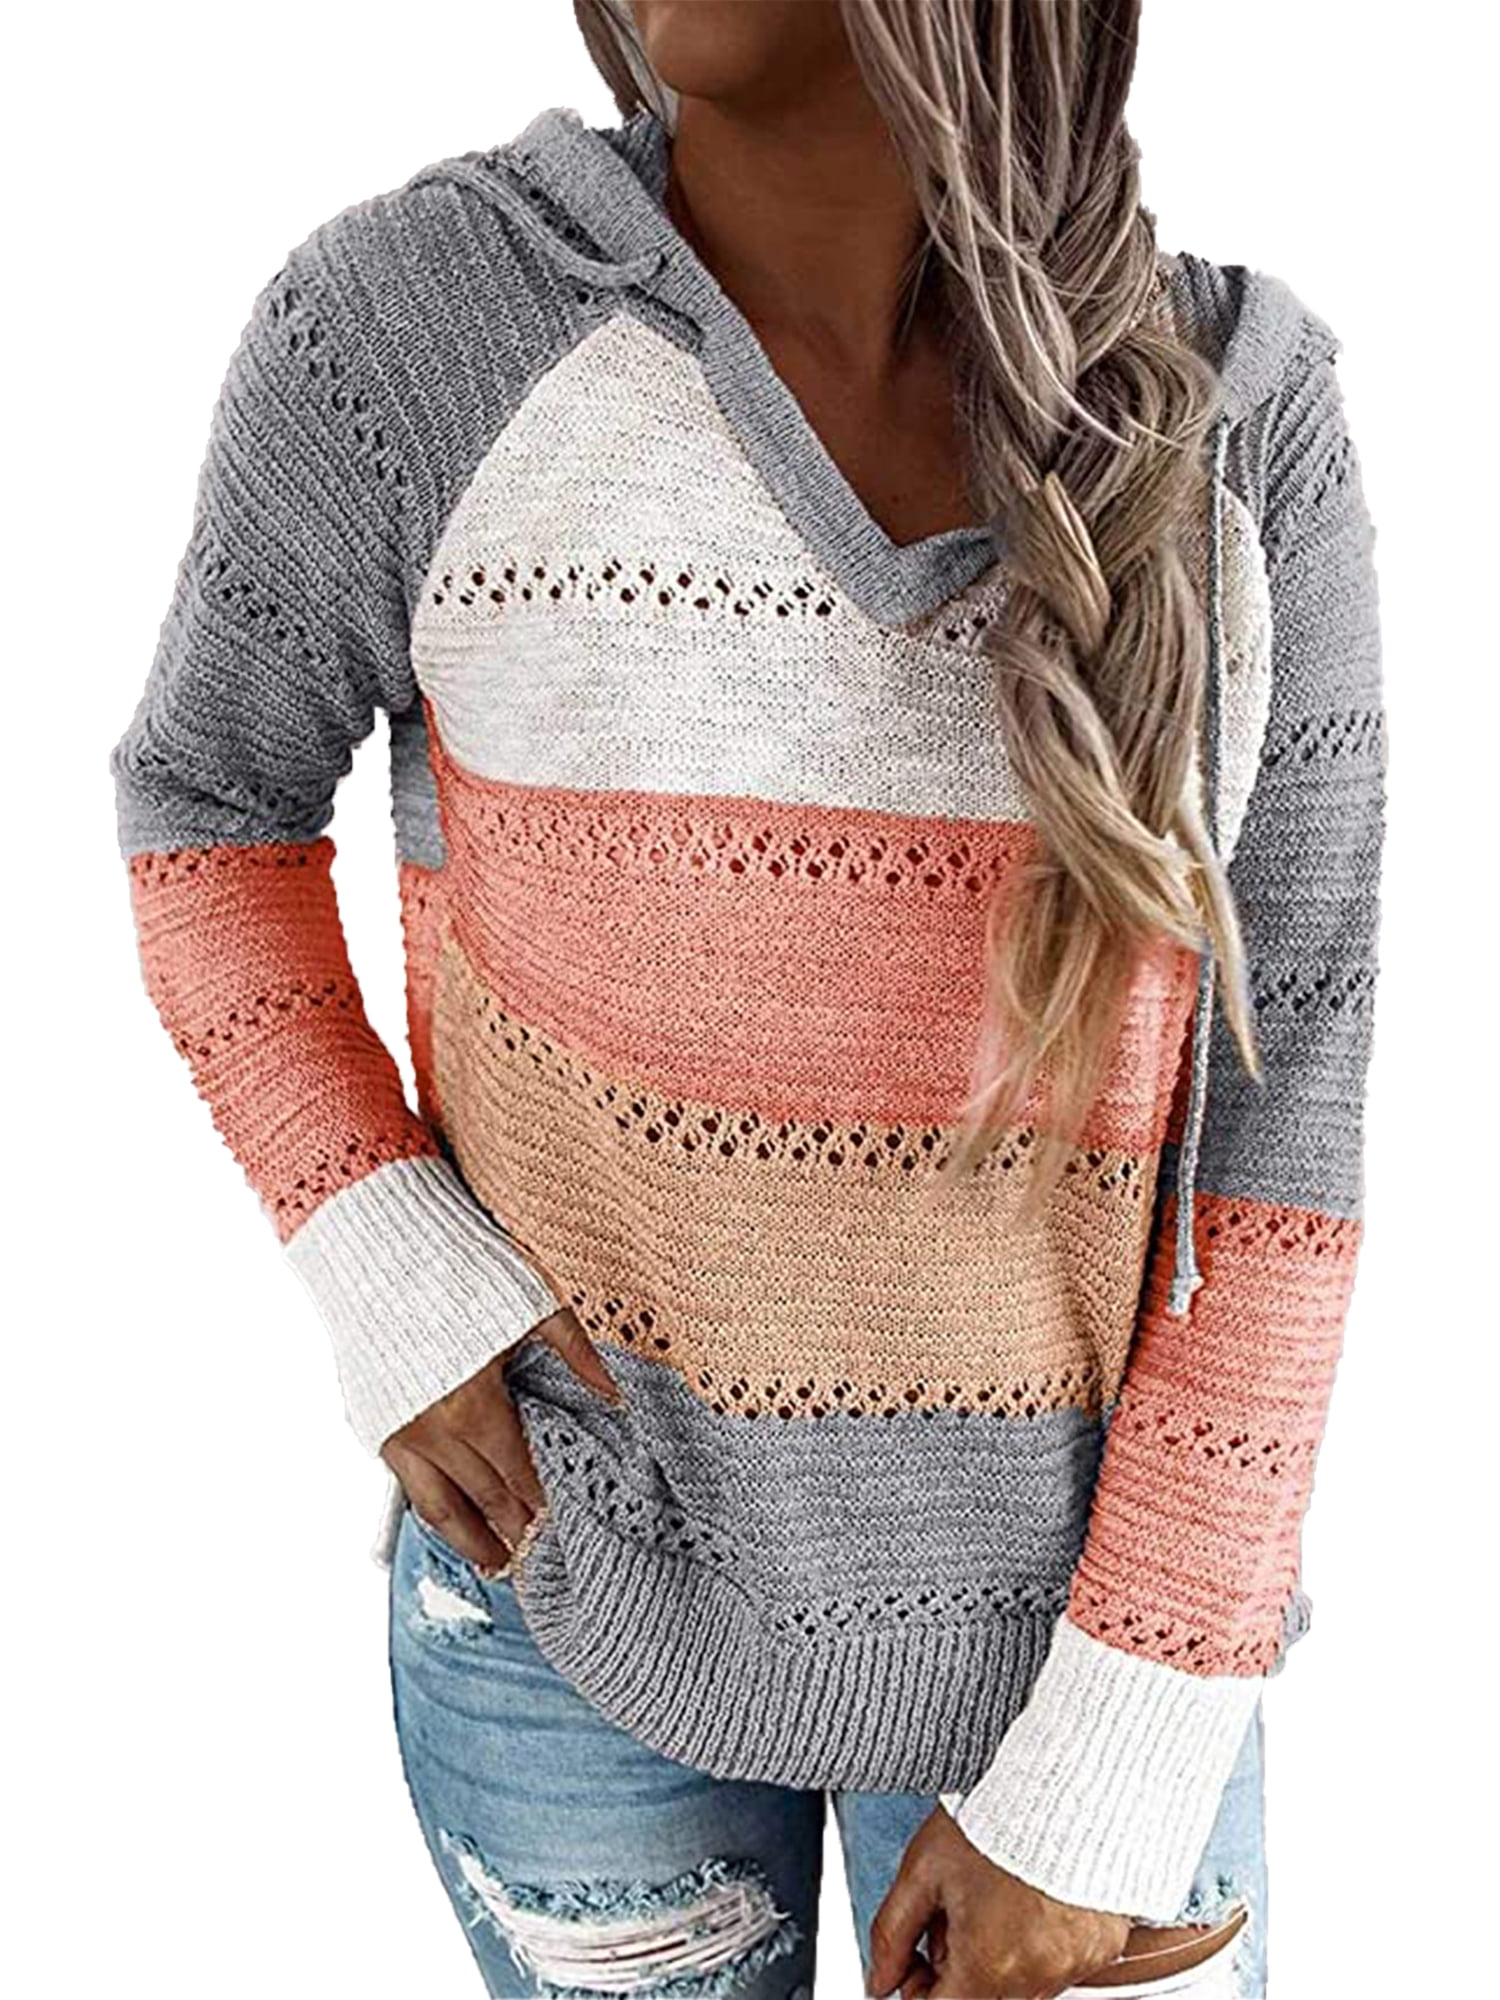 Womens Striped Knitted Jumper Long Sleeve Sweater Casual Loose Pullover Tops 